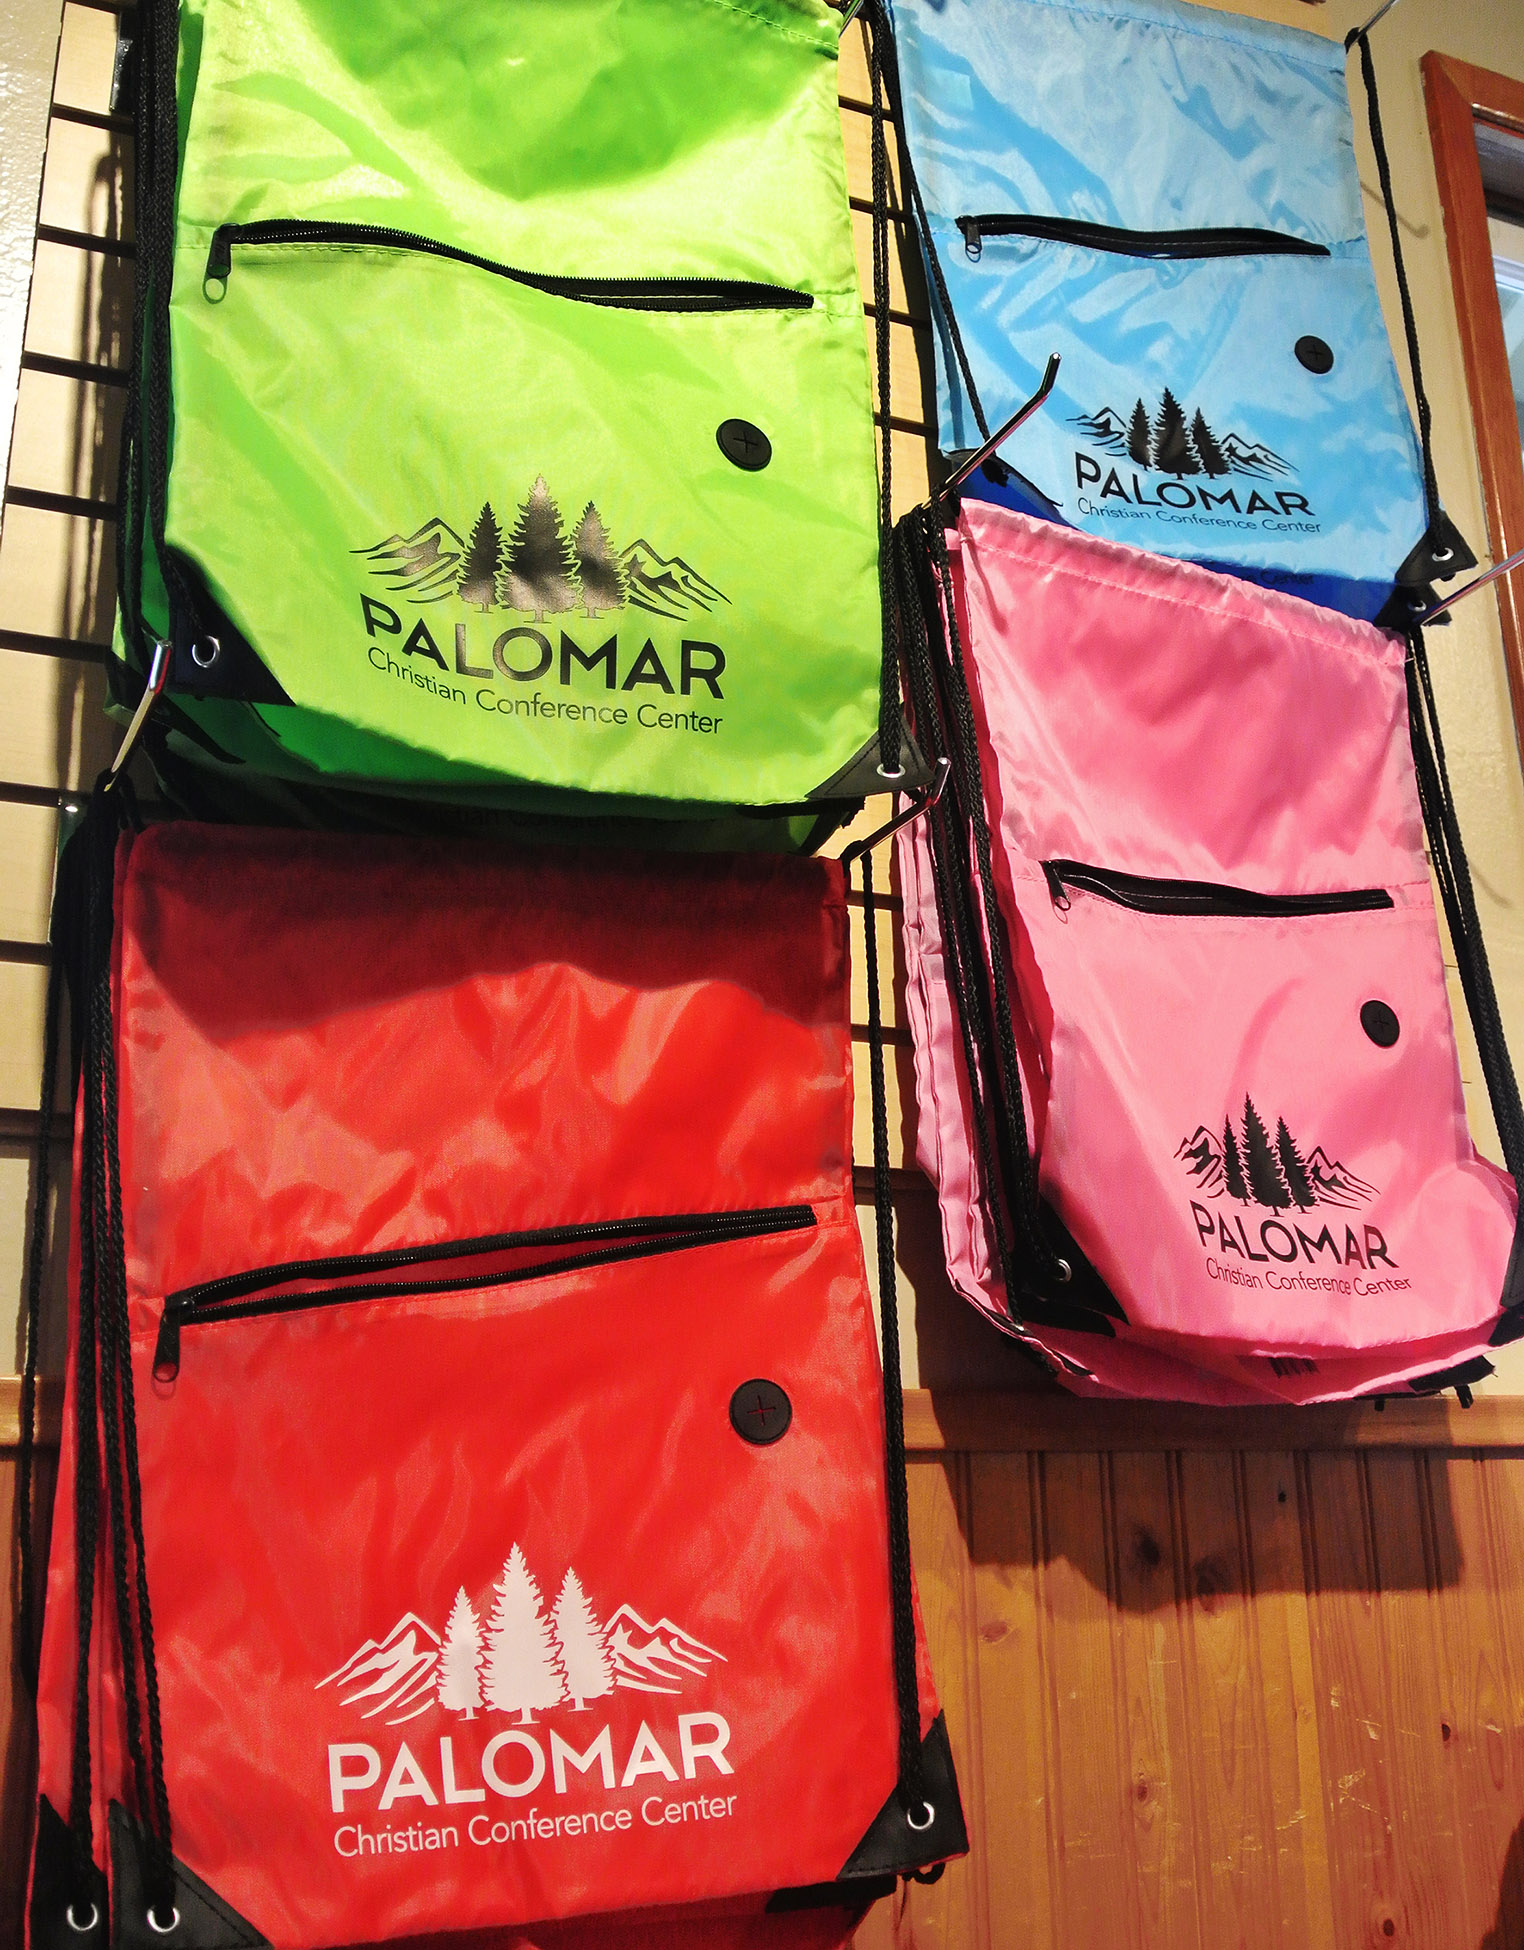 Palomar Christian Conference Center heat transfer bags